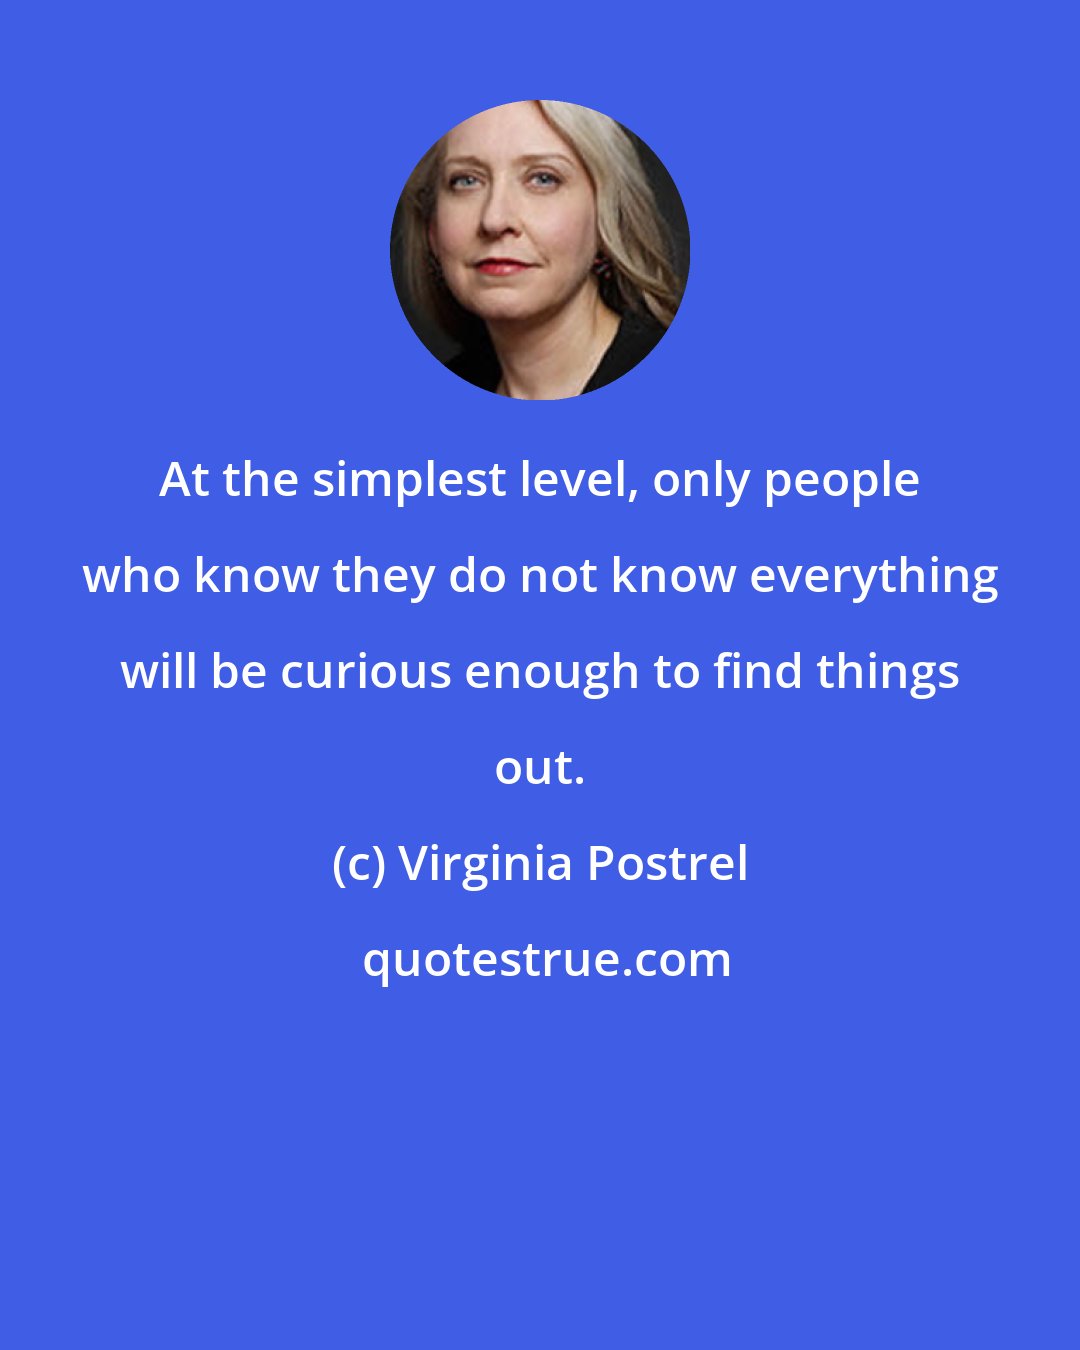 Virginia Postrel: At the simplest level, only people who know they do not know everything will be curious enough to find things out.